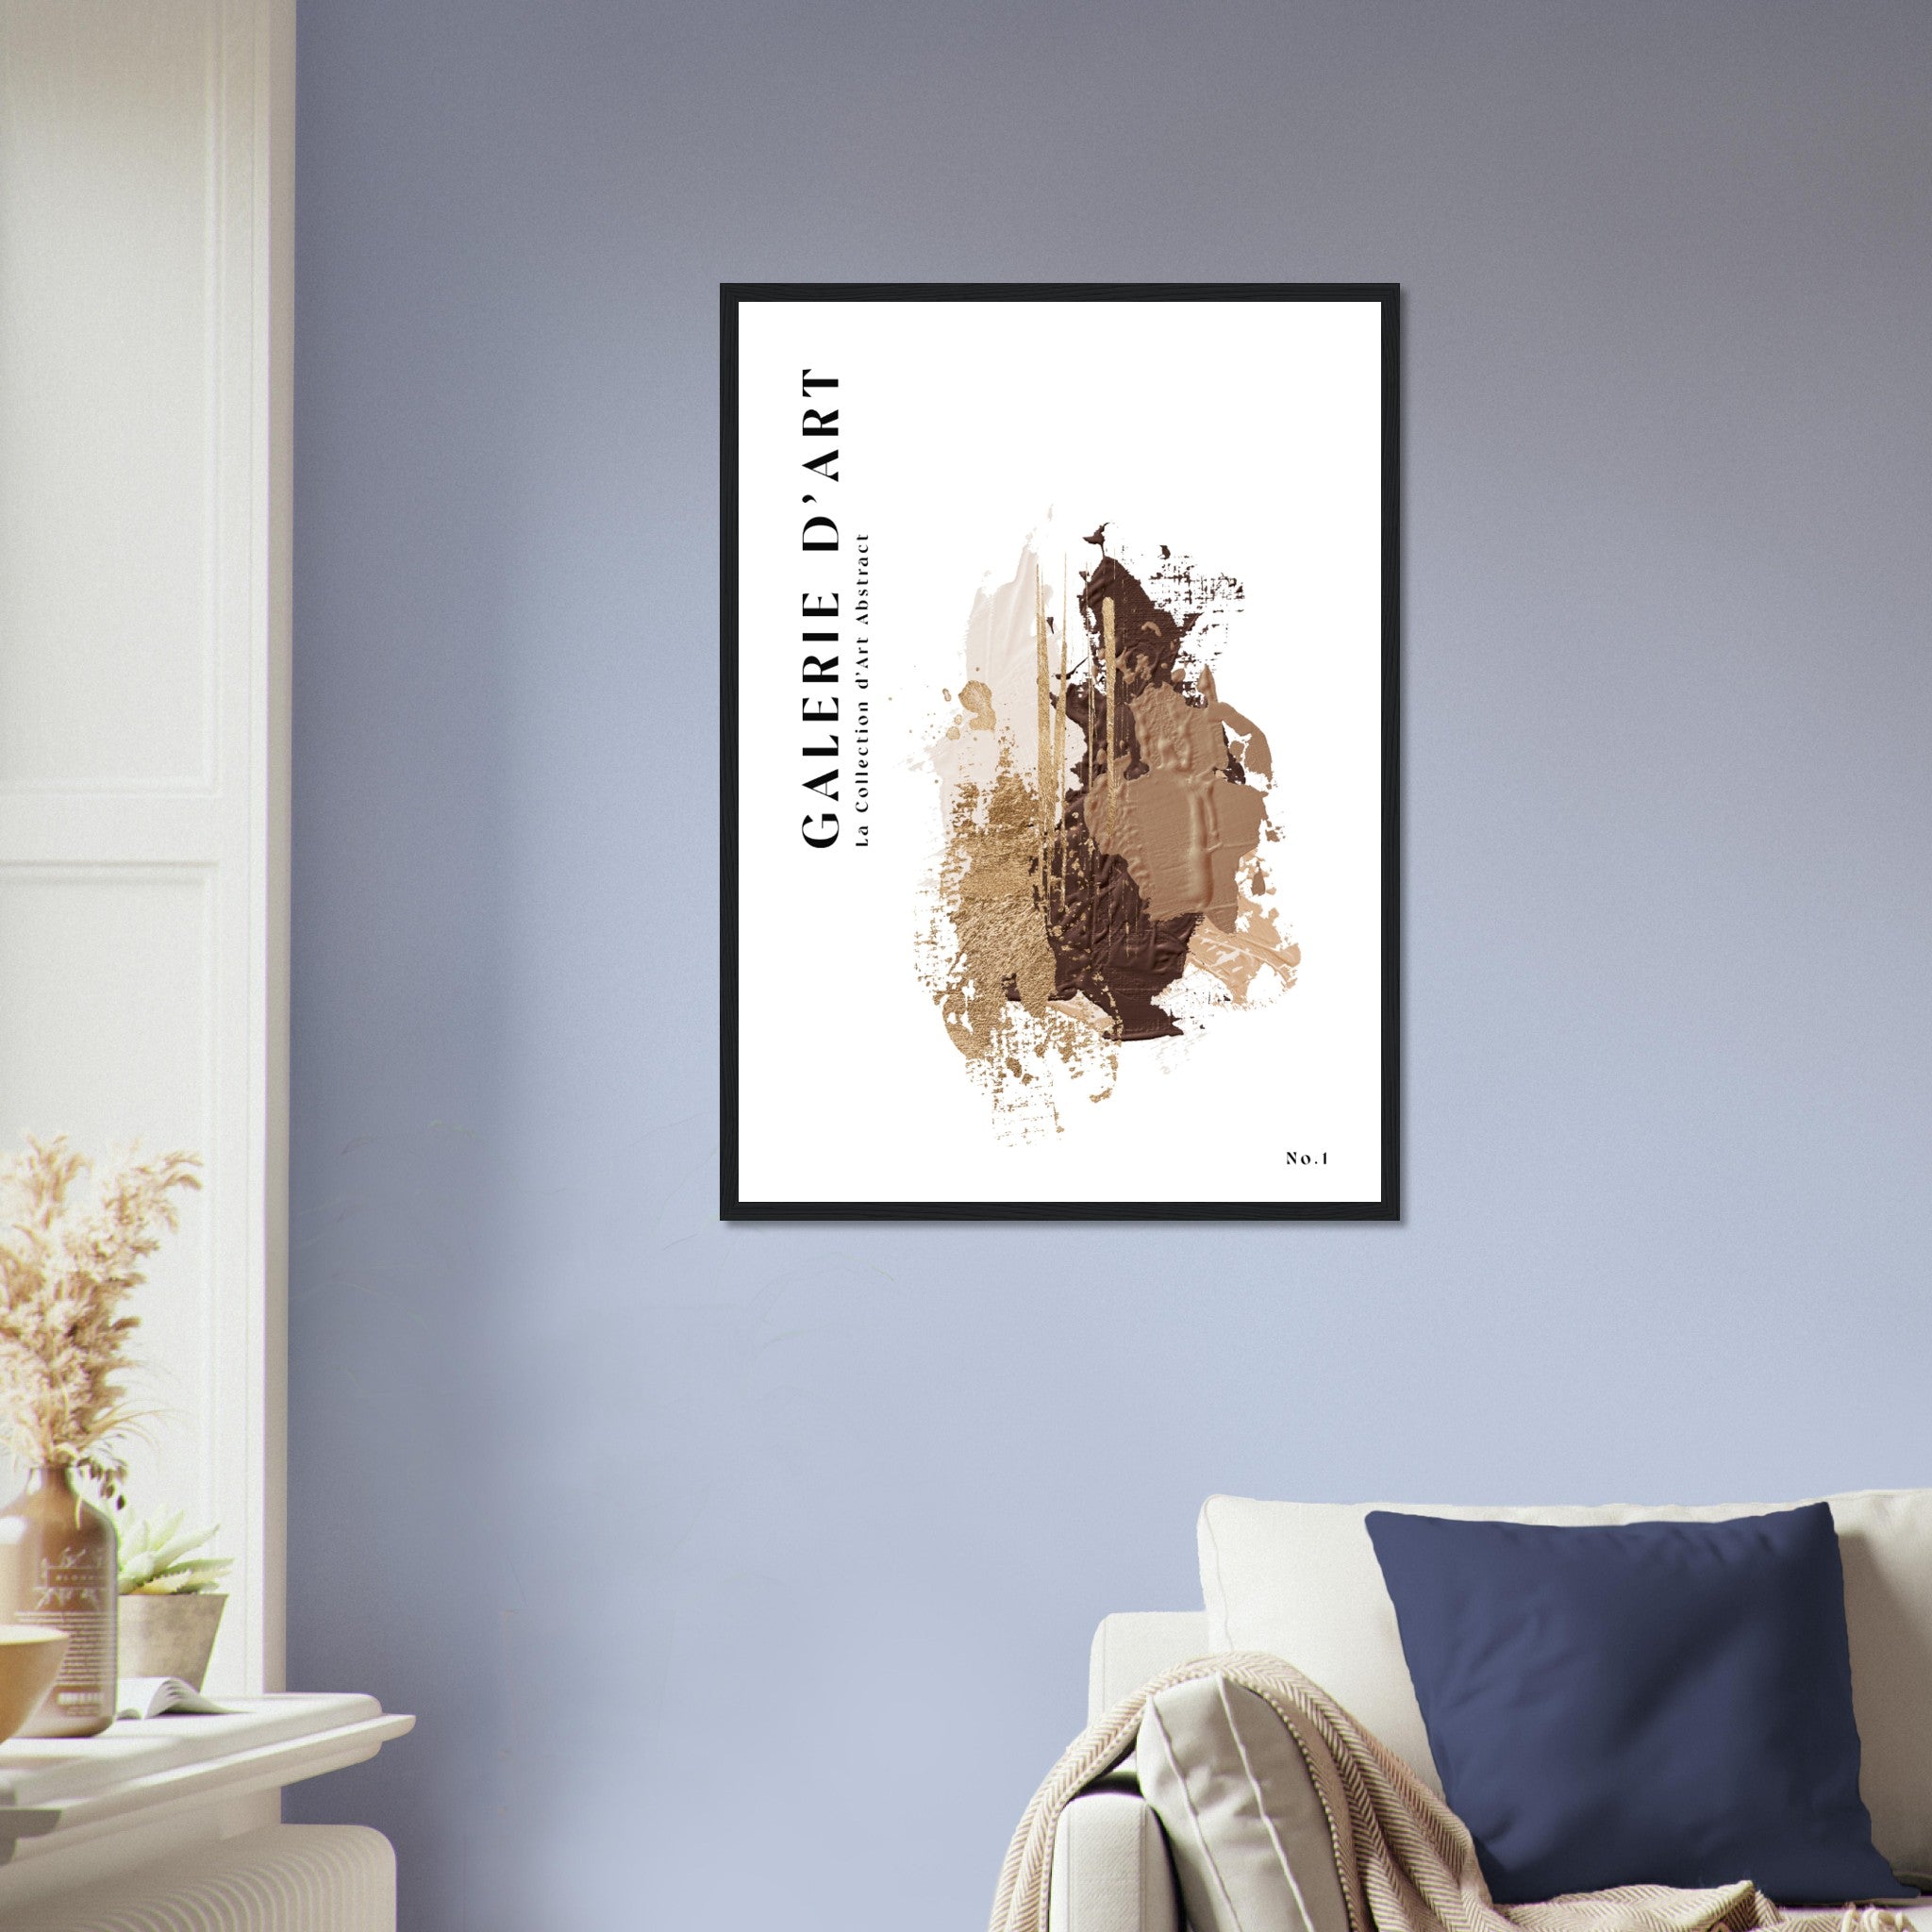 Galerie Art Abstract No. 1 Poster